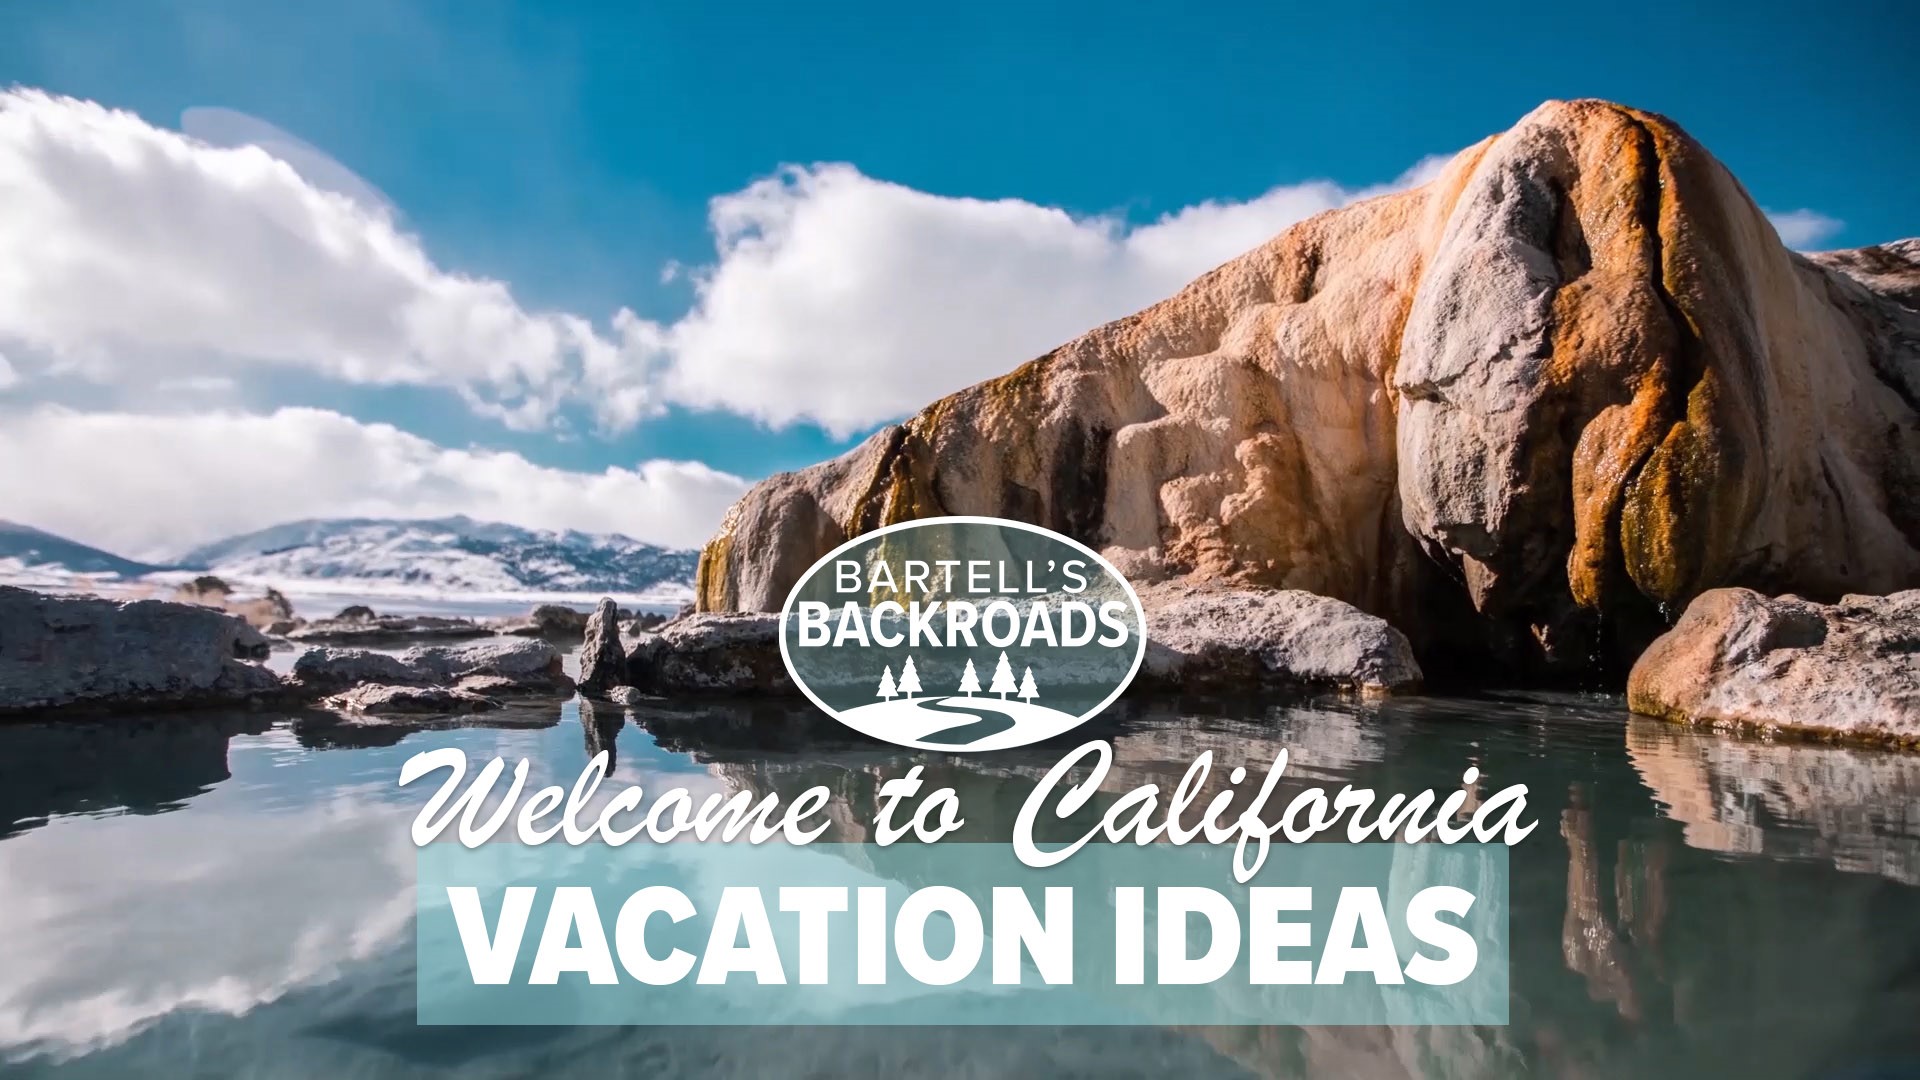 January 28th is National Plan for Vacation Day. Have you planned your vacation this year? Bartell shares 3 top places you'll want to add to your travels.